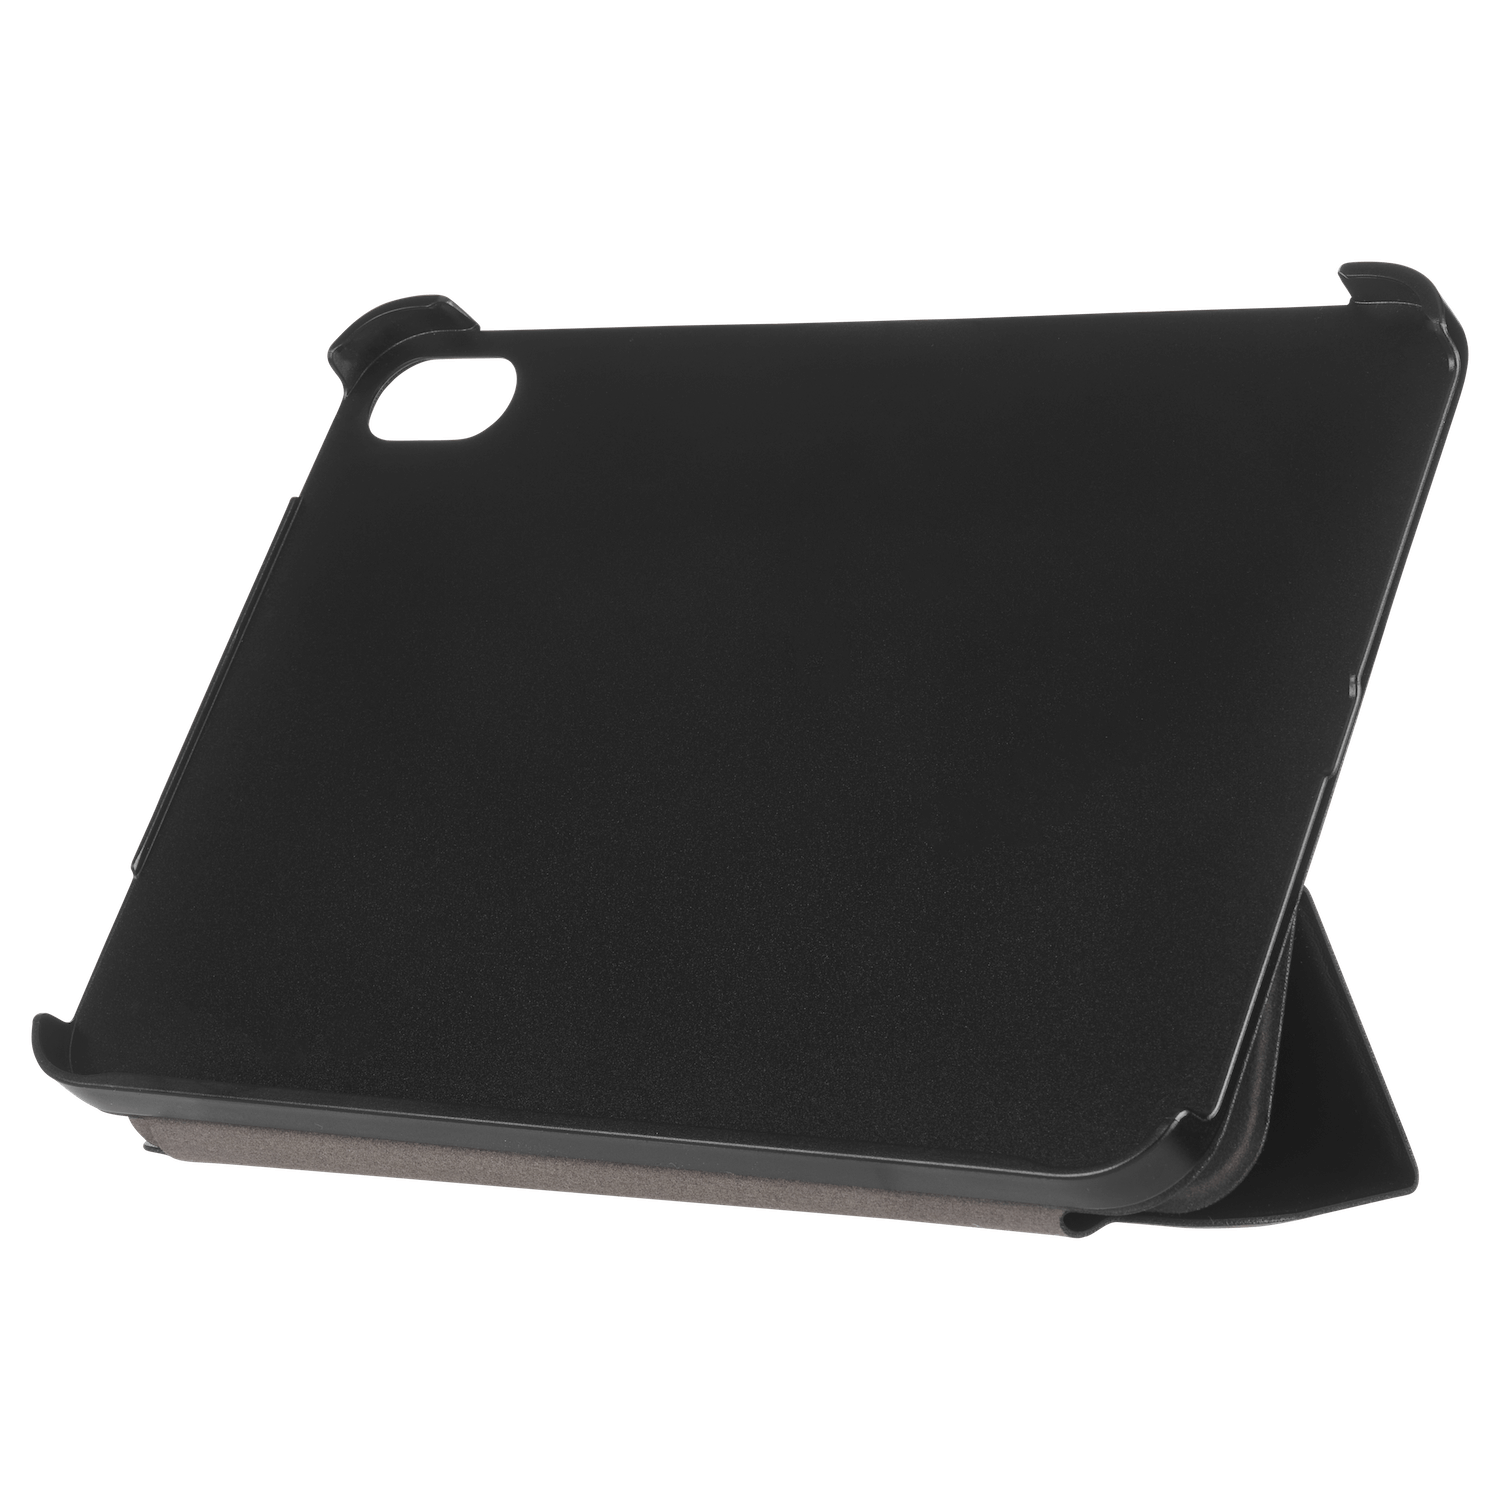 Case props iPad up horizontally. color::Black